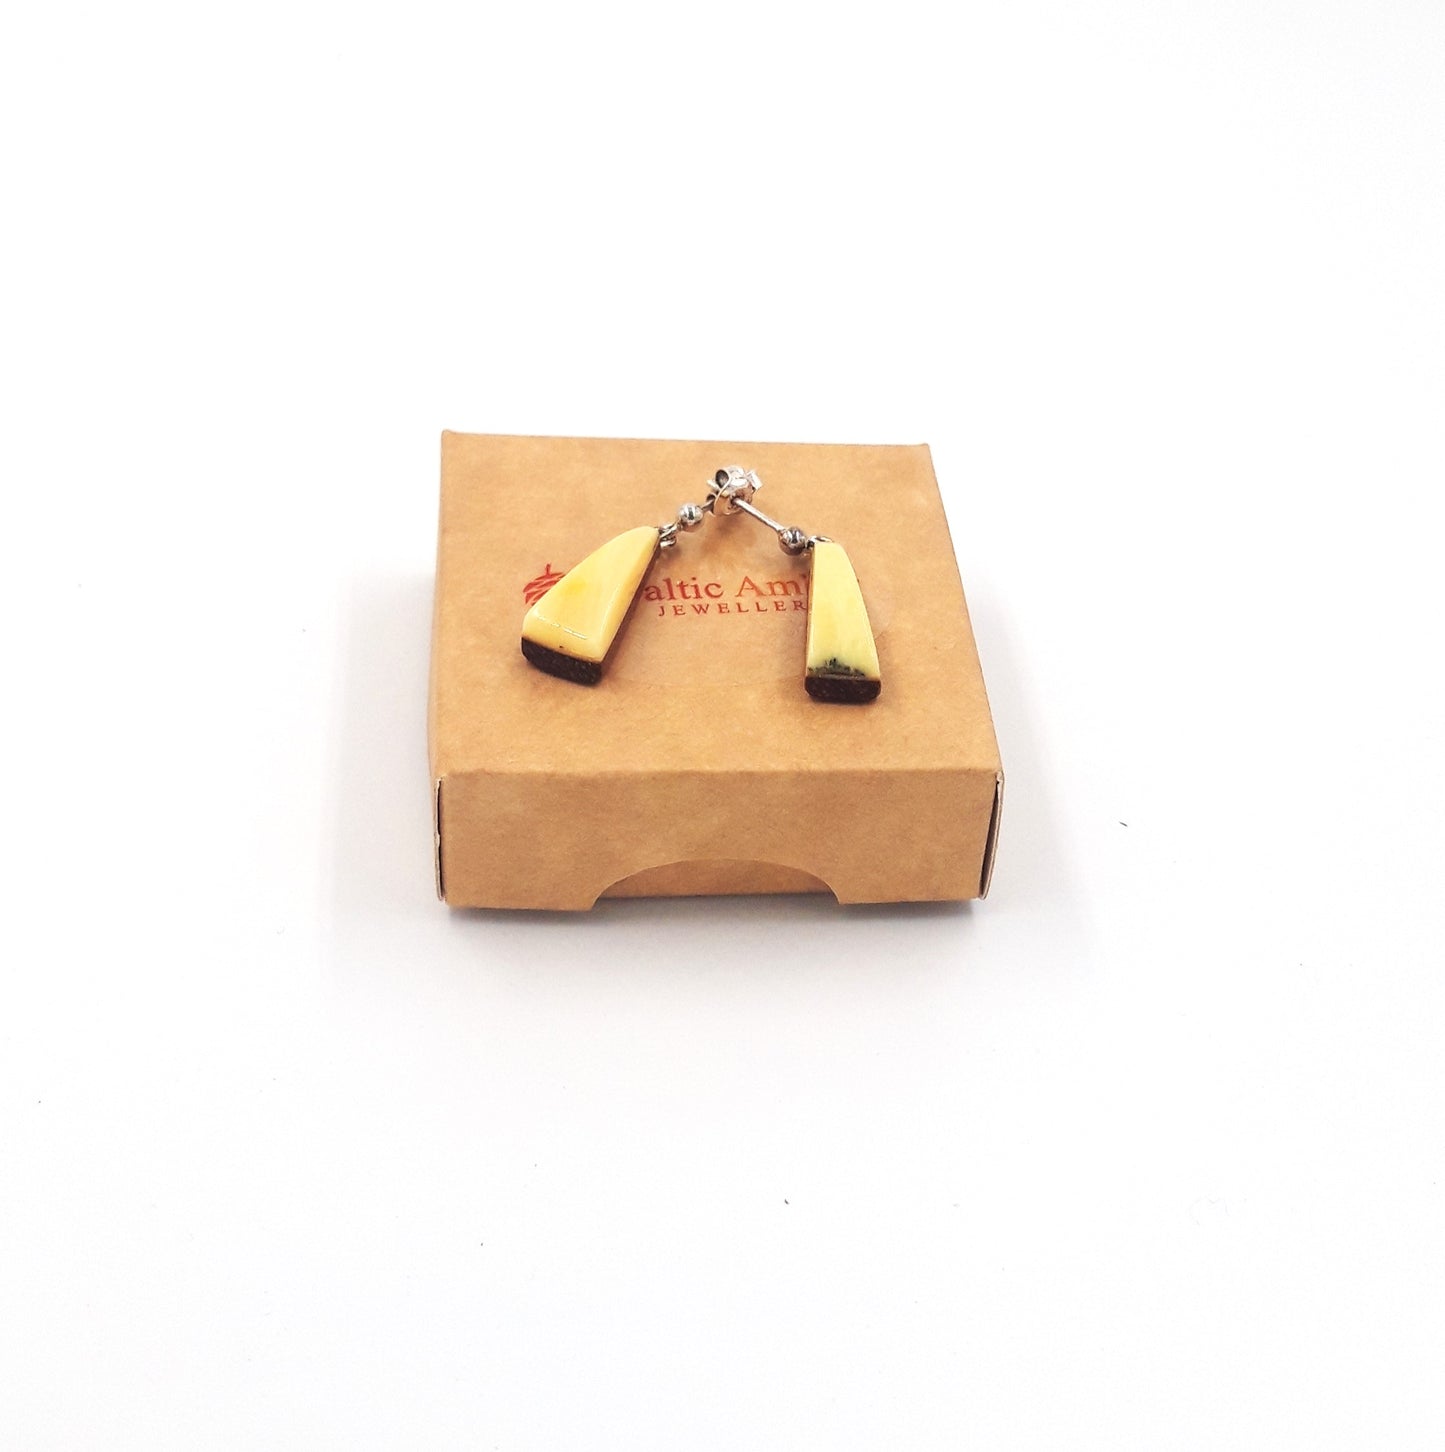 Earrings made of Baltic amber and wood